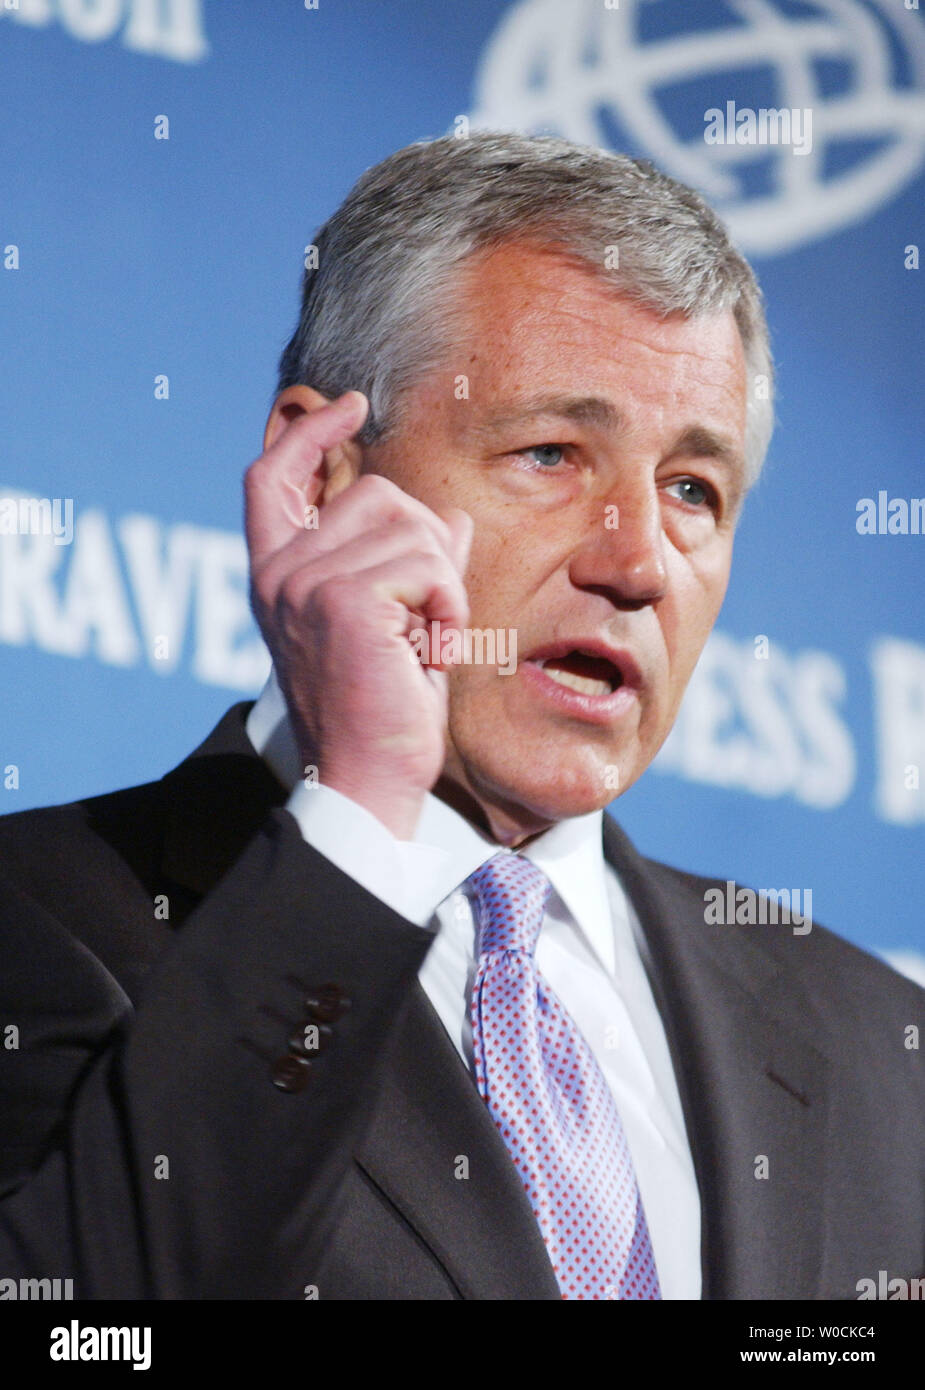 Sen. Chuck Hagel, R-Neb, speaks to those gathered at the U.S. Chamber of Commerce for its 3rd Annual Travel and Tourism Summit, 'Redefining America at Home and Abroad' on April 20, 2005 in Washington.  Hagel called for further investigation into President Bush's nominee for U.N. ambassador John Bolton at yesterdays Senate hearing.  (UPI Photo/Michael Kleinfeld) Stock Photo